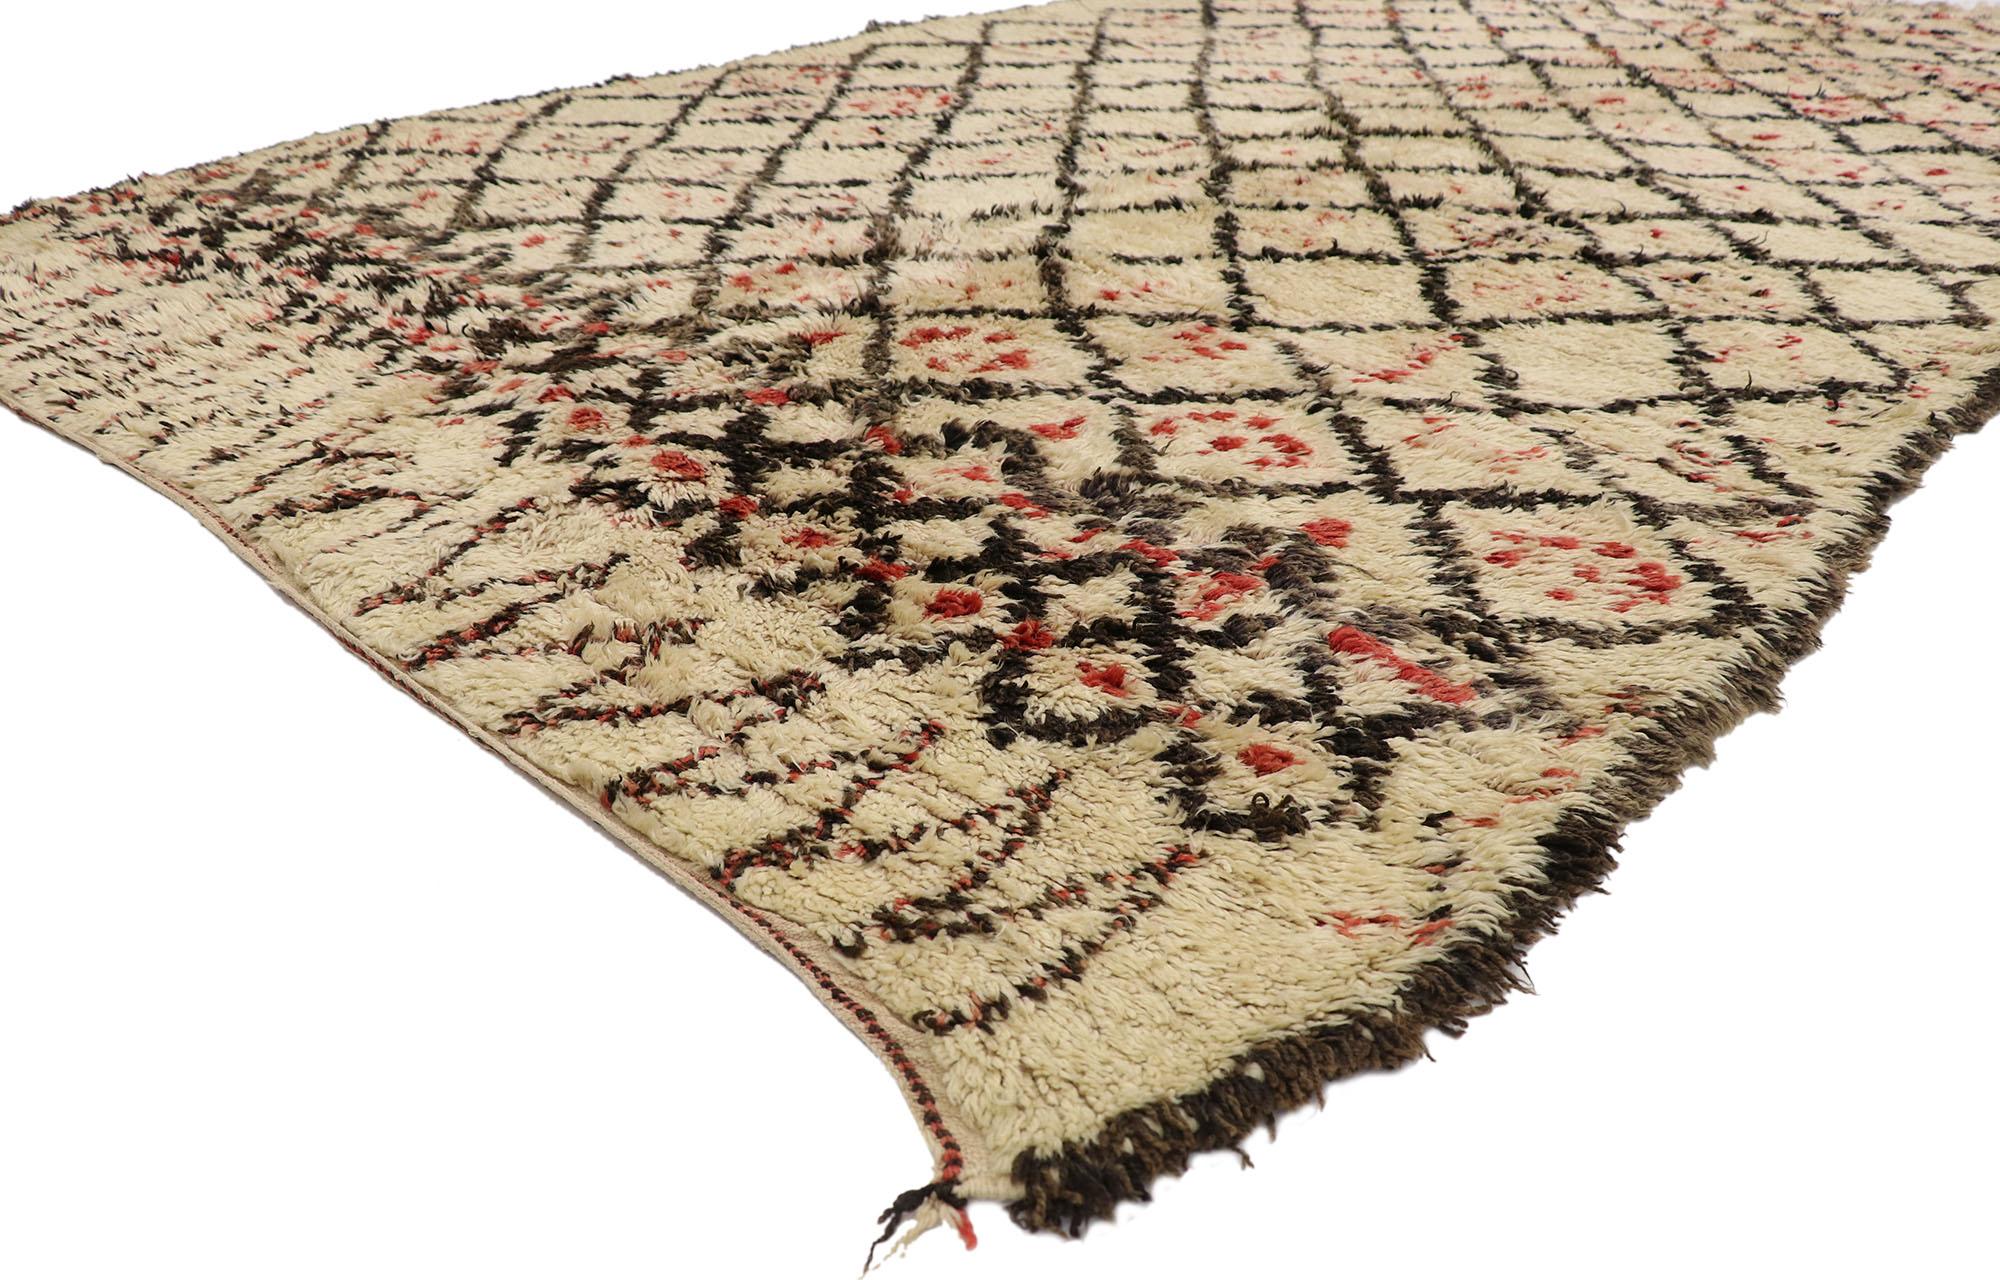 21394 Vintage Moroccan Beni Ourain Rug, 06'06 x 11'02. ?Emanating nomadic charm with incredible detail and texture, this hand knotted wool vintage Beni Ourain Moroccan rug is a captivating vision of woven beauty. The eye-catching diamond trellis and